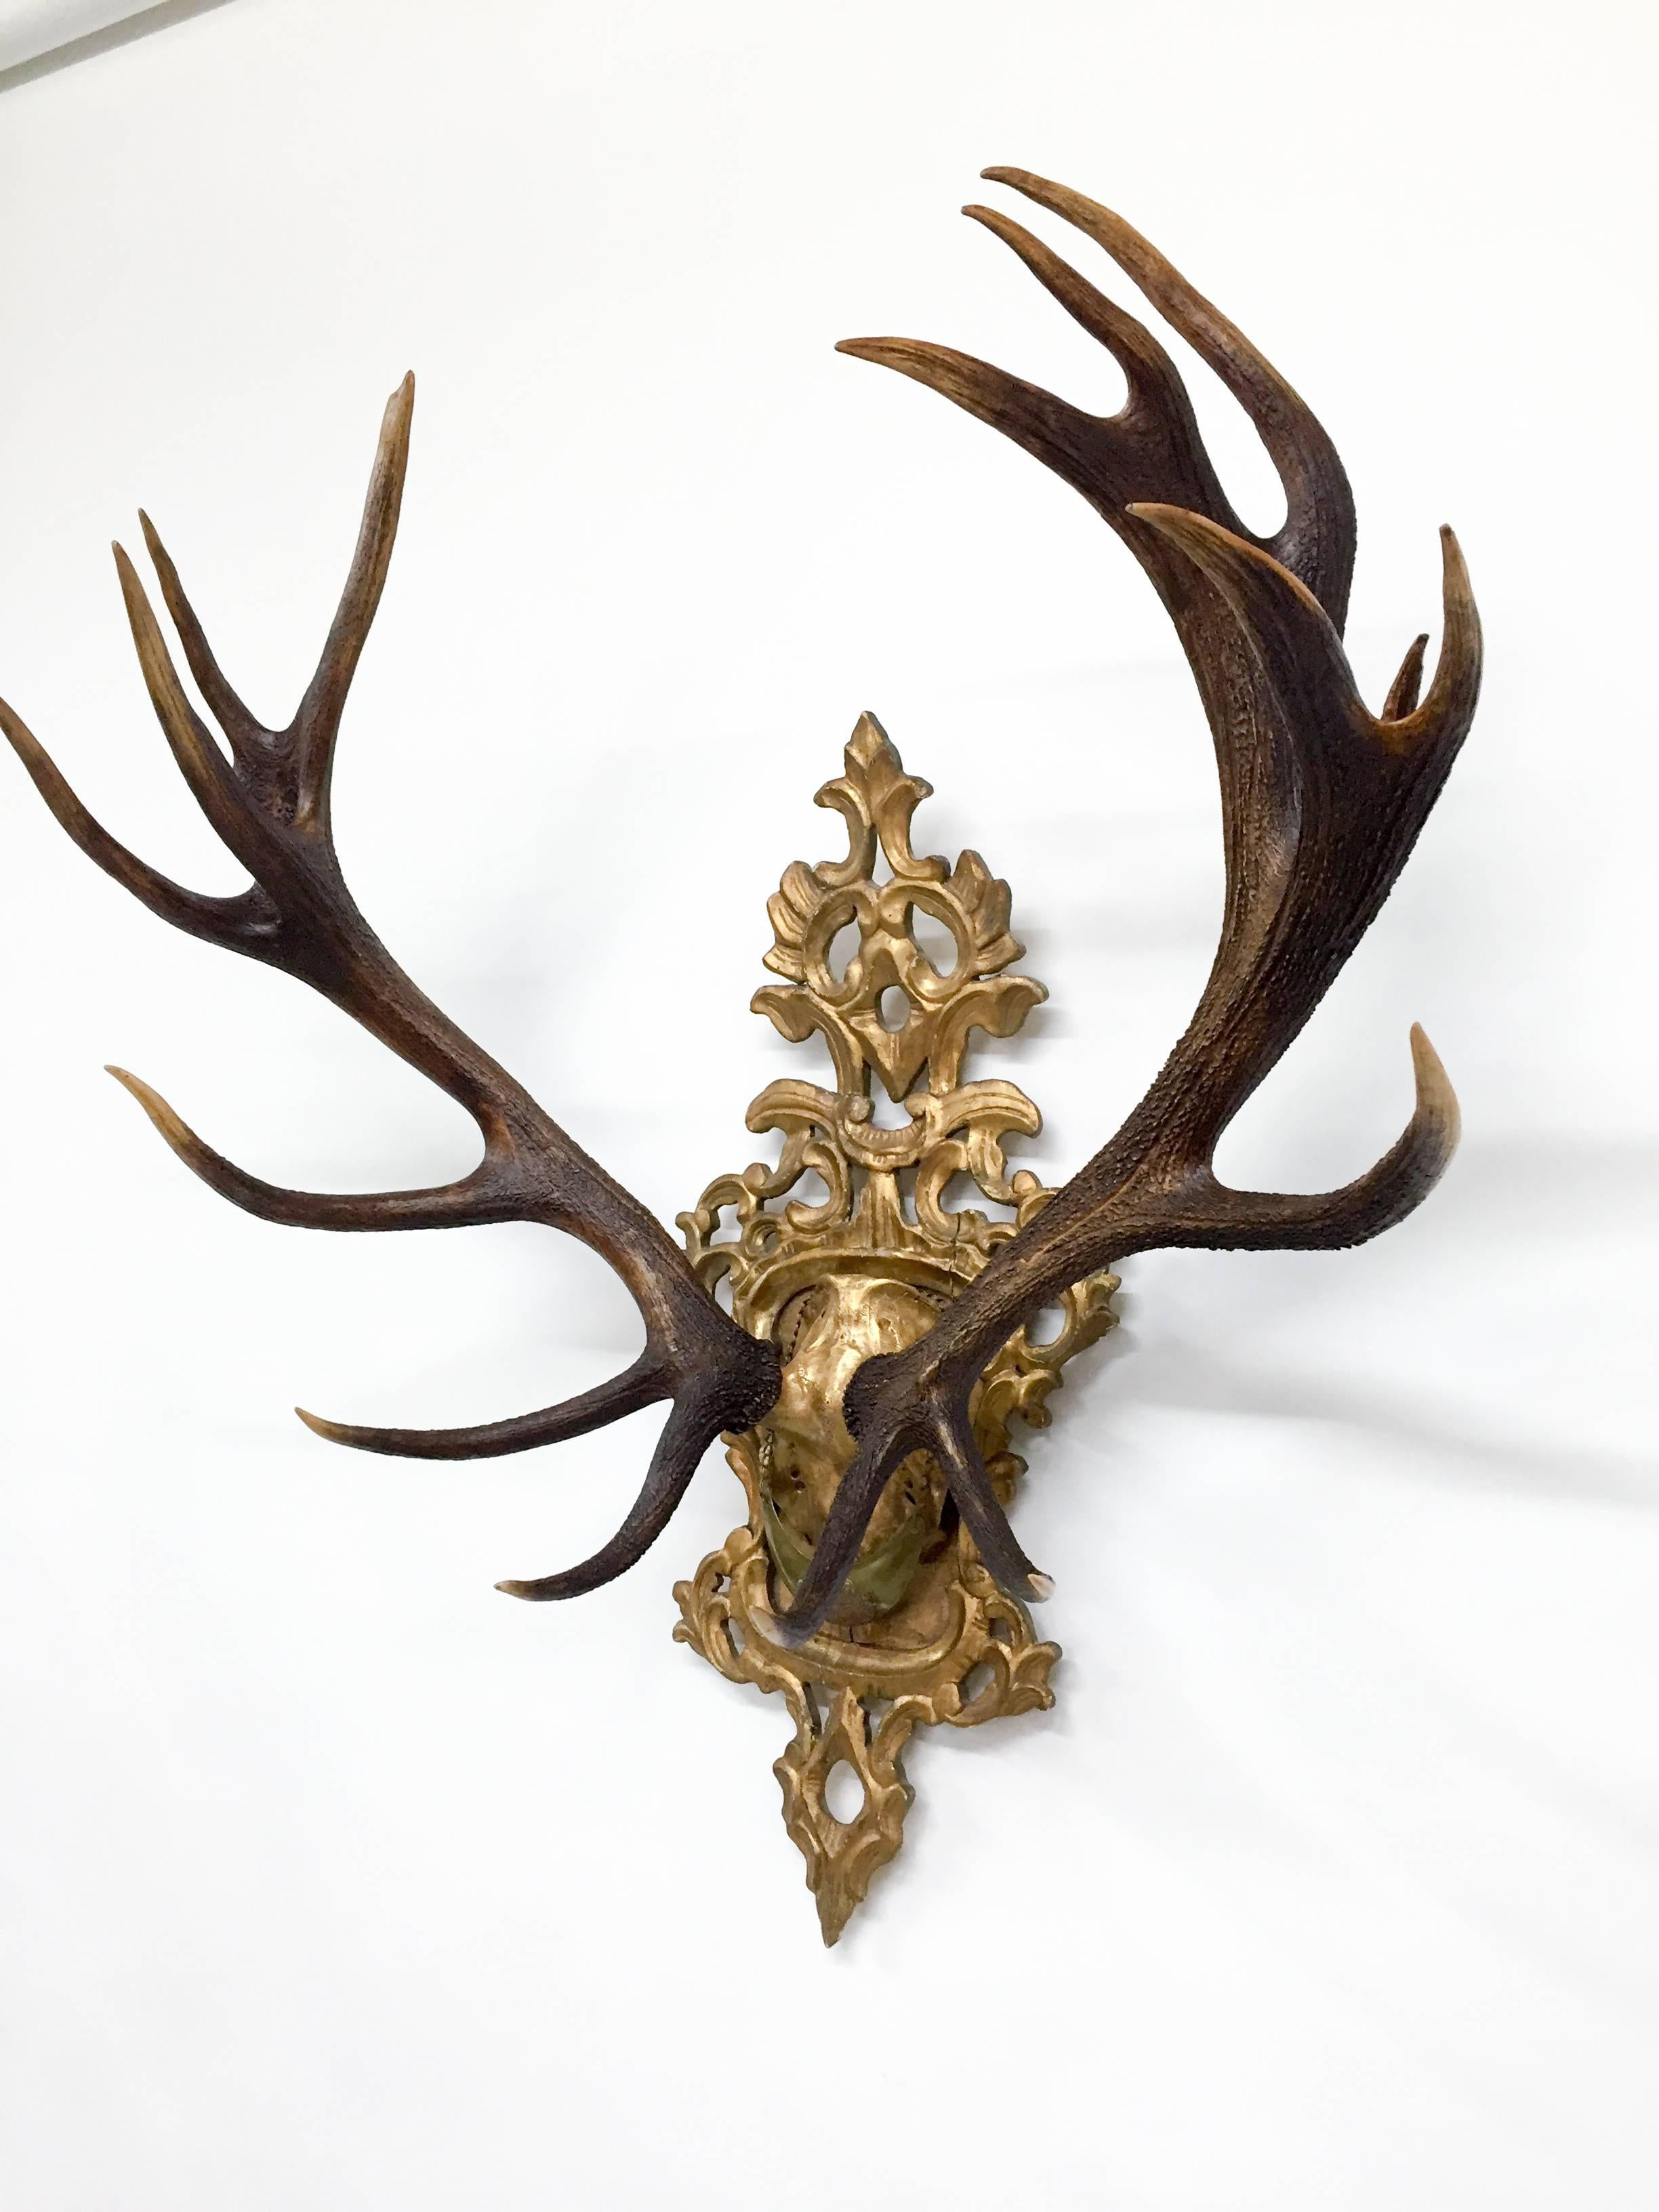 Austrian 19th C. Habsburg Red Stag Trophy on Hand-Carved Gilt Rococo Plaque with Gilt Cap